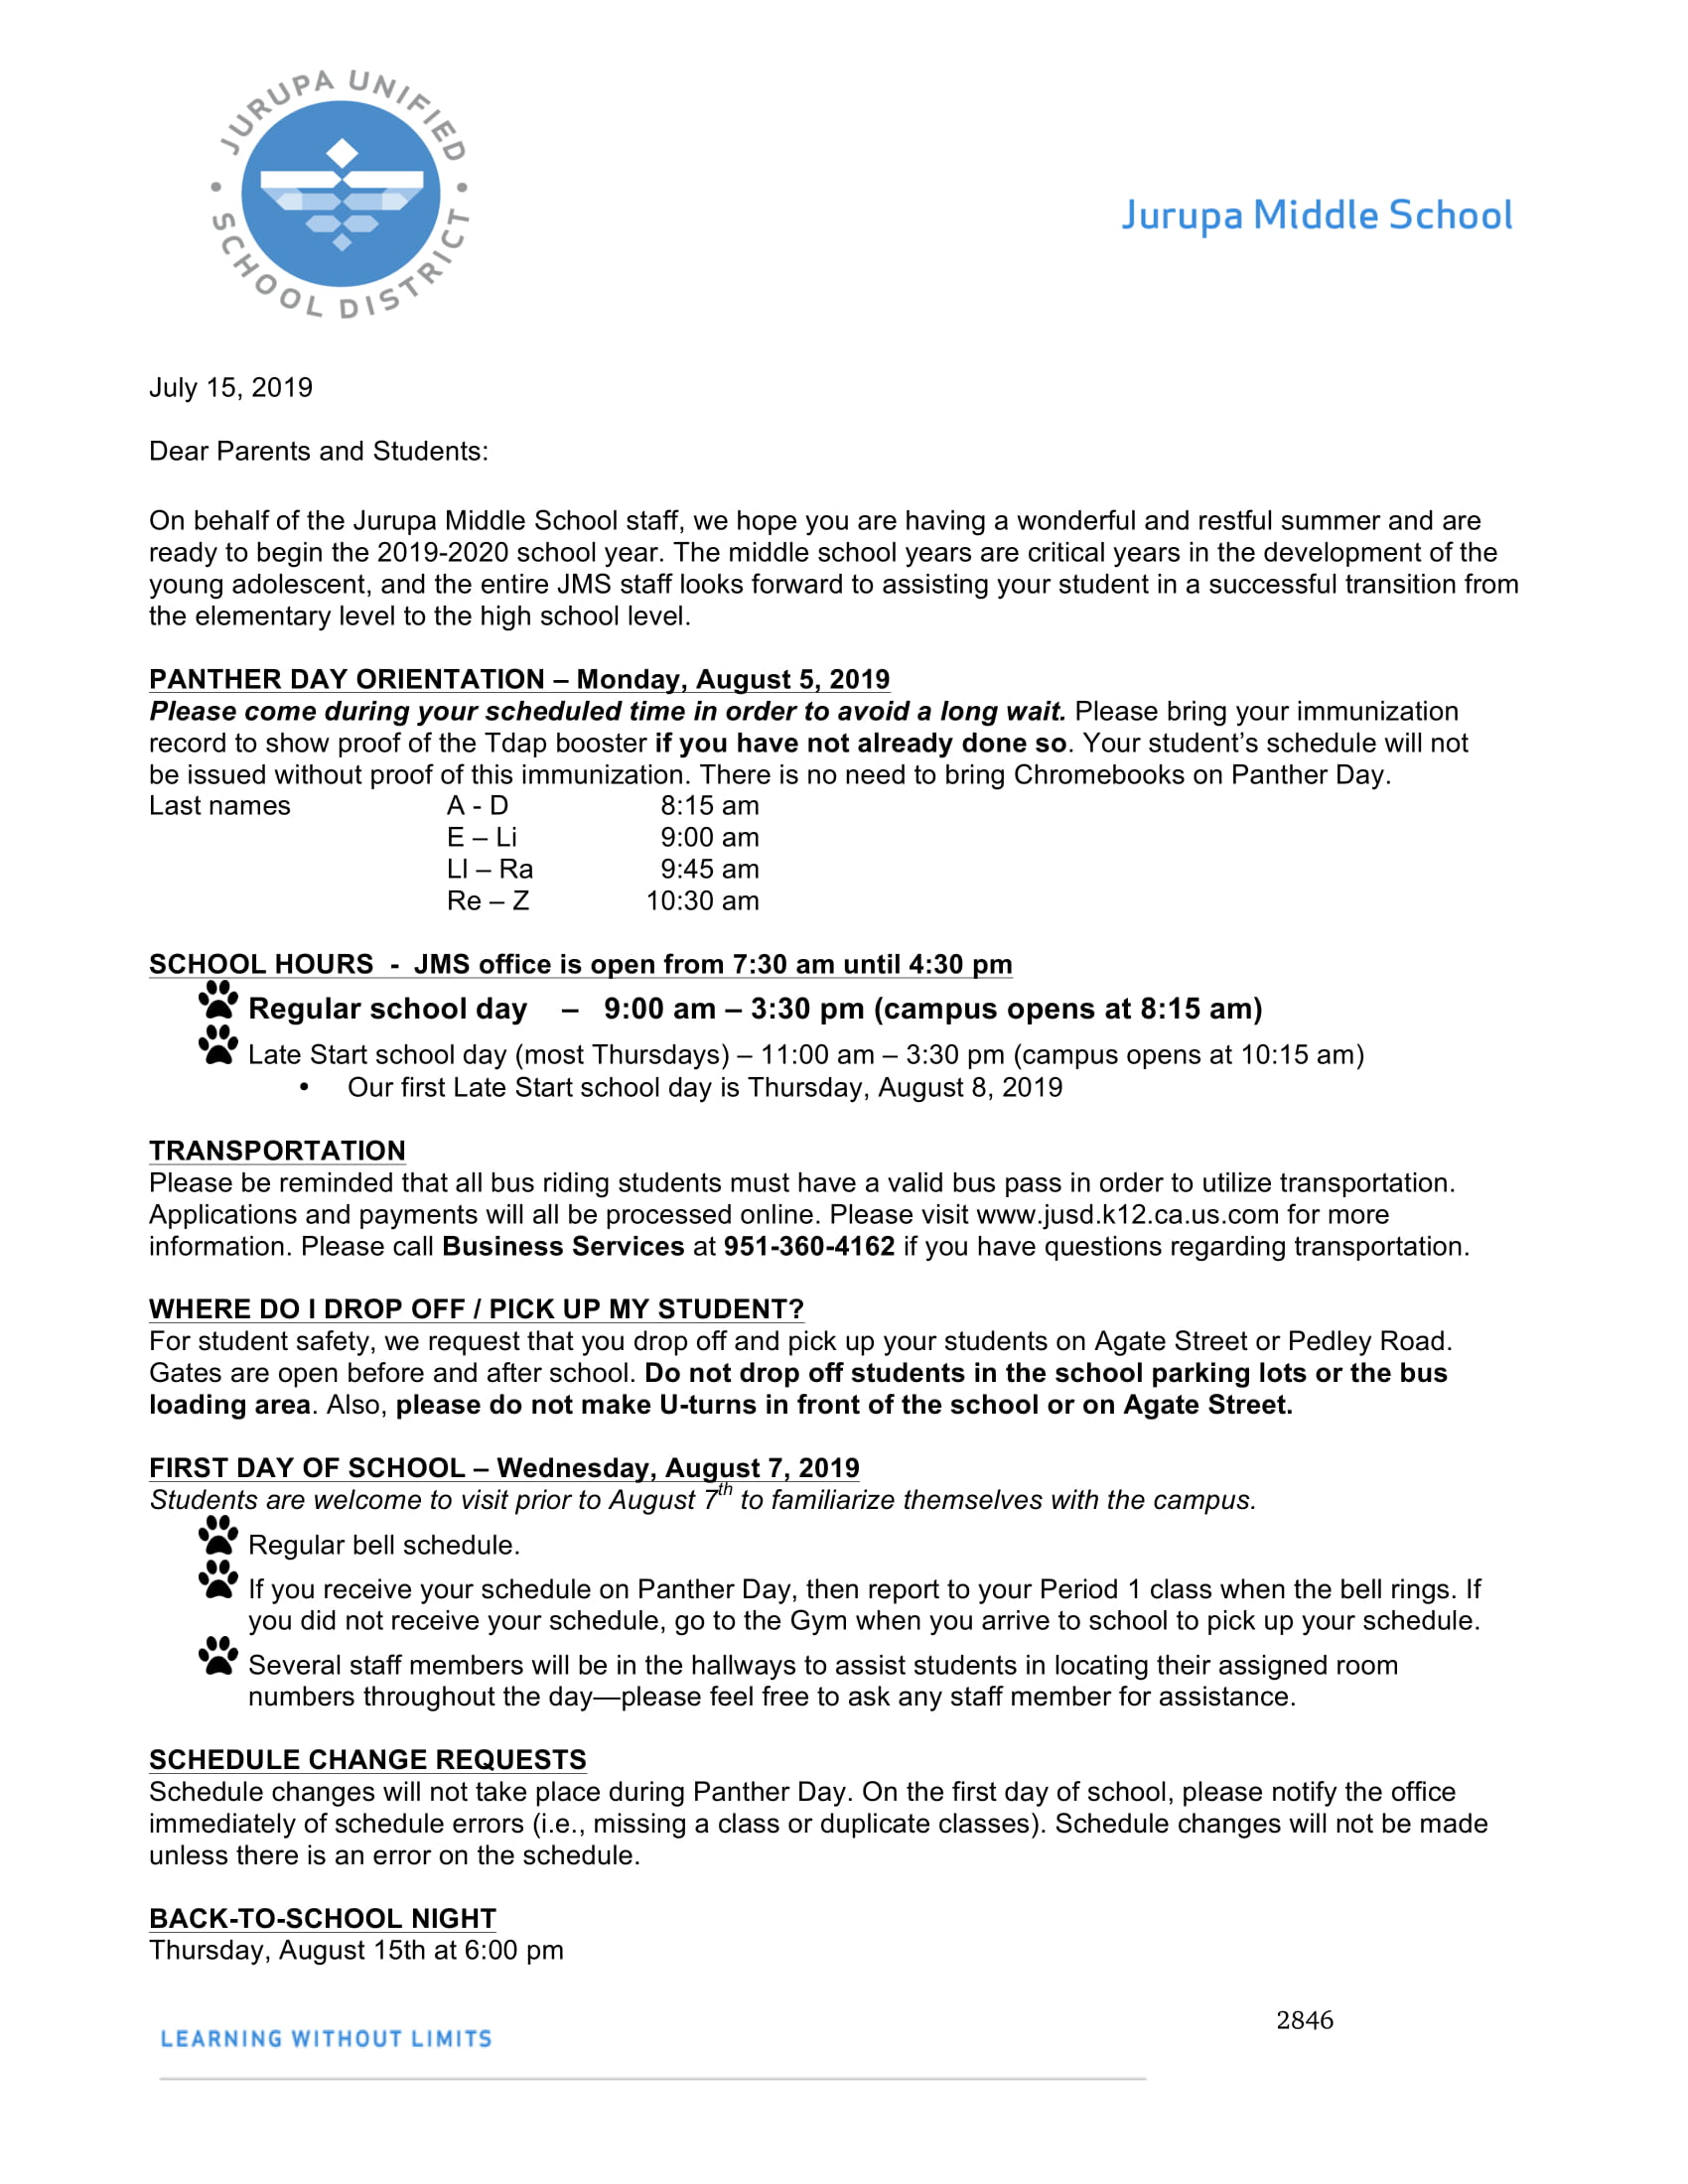 Student Welcome Letter 19-20-1.jpg